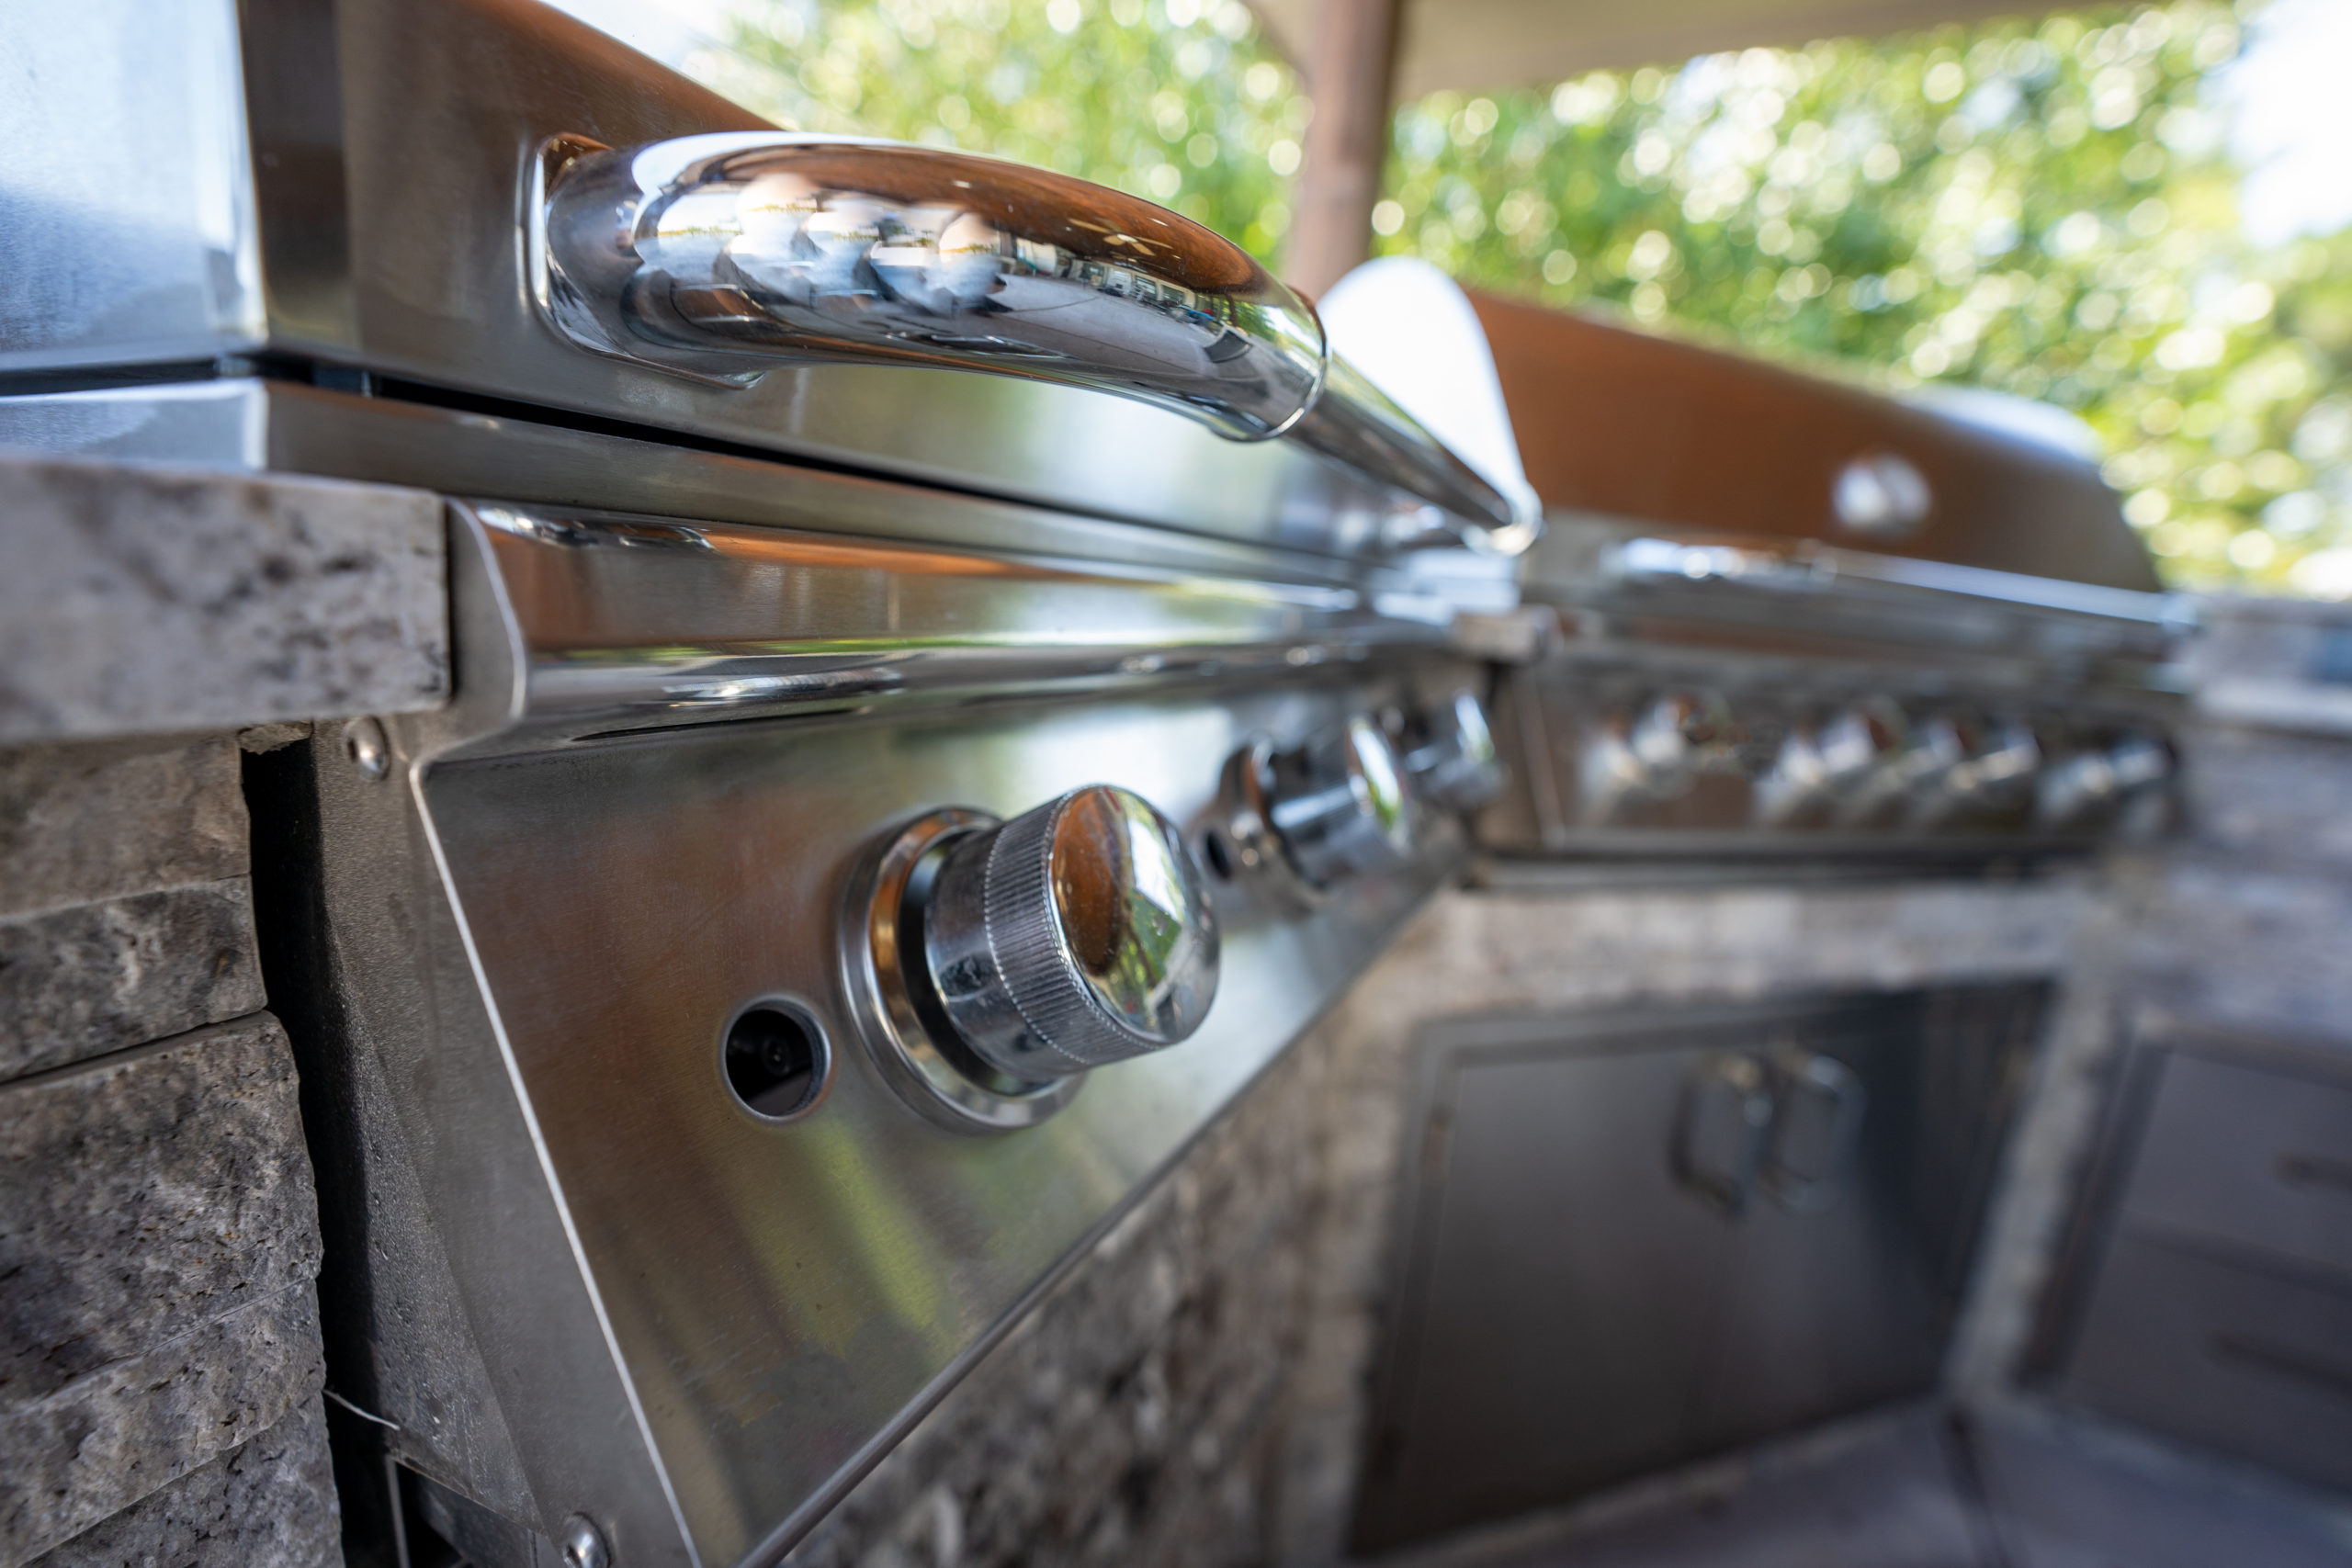 5 Reasons Why You Should Install an Outdoor Kitchen